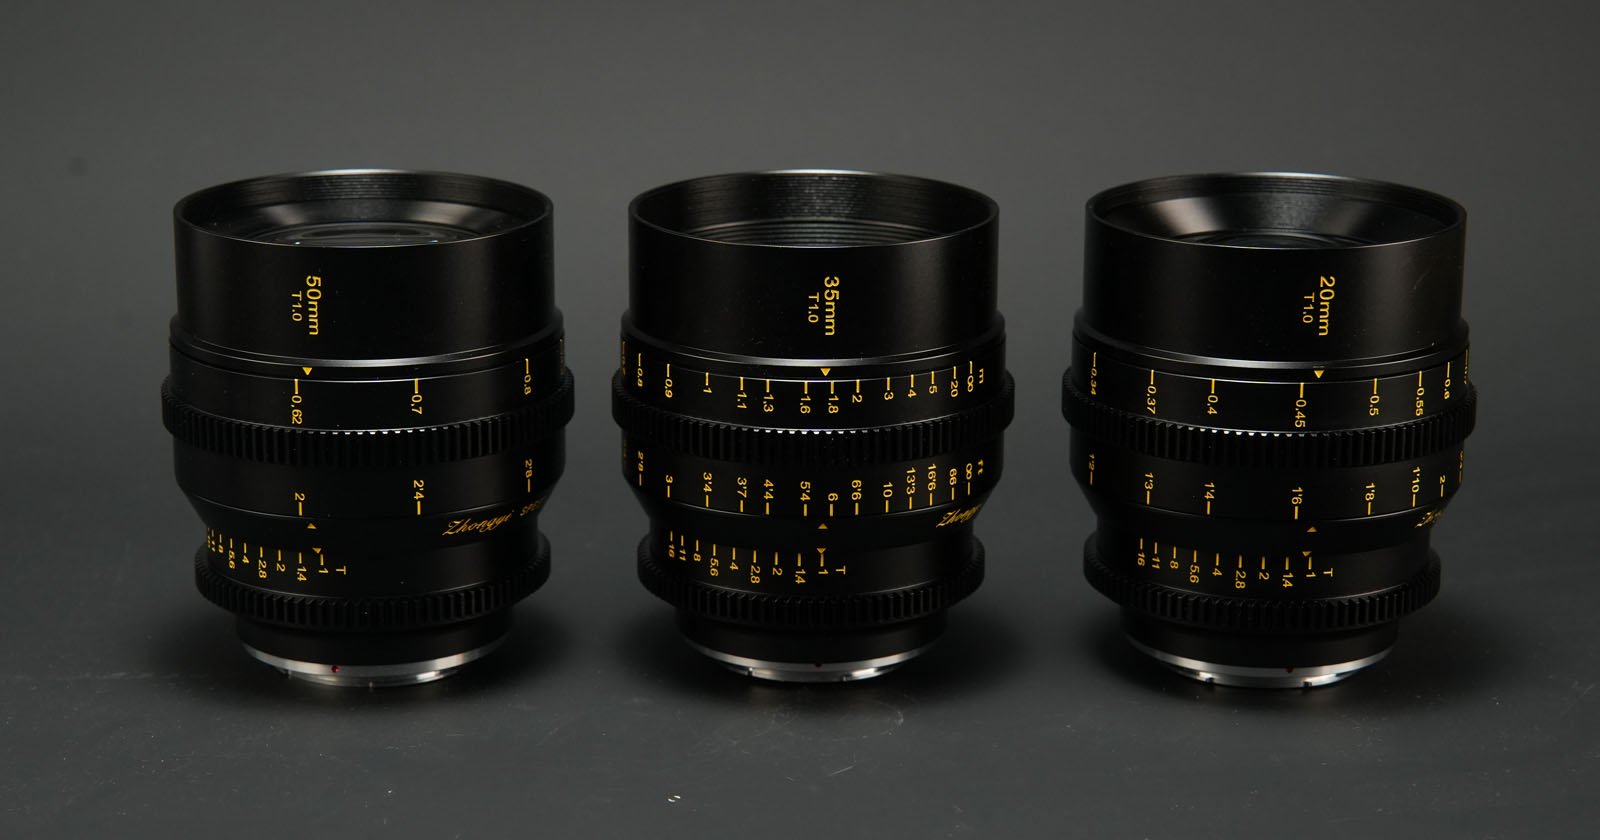 ZY Optics Three T/1.0 Lenses for Super 35 are Fast and Affordable